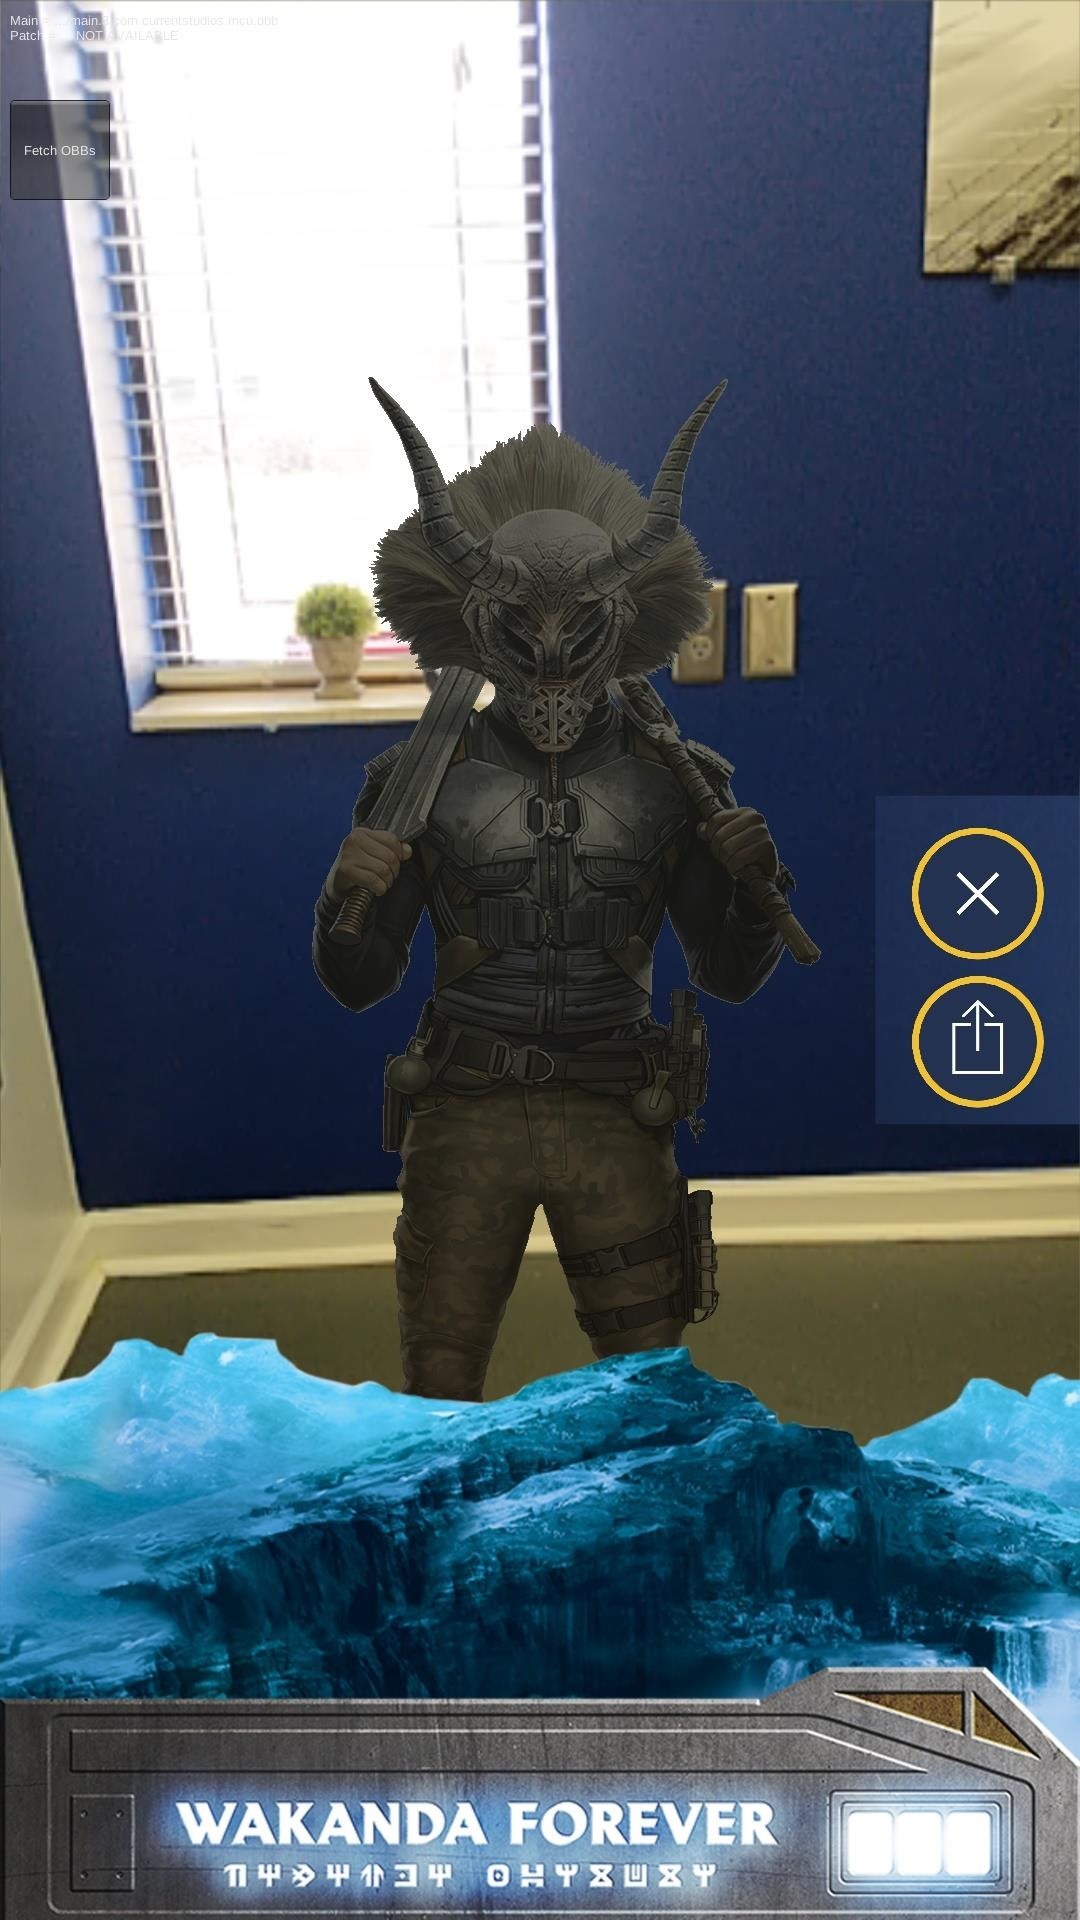 Walmart Shoppers Can Now Use Their Smartphones to Become Marvel's Black Panther via Augmented Reality